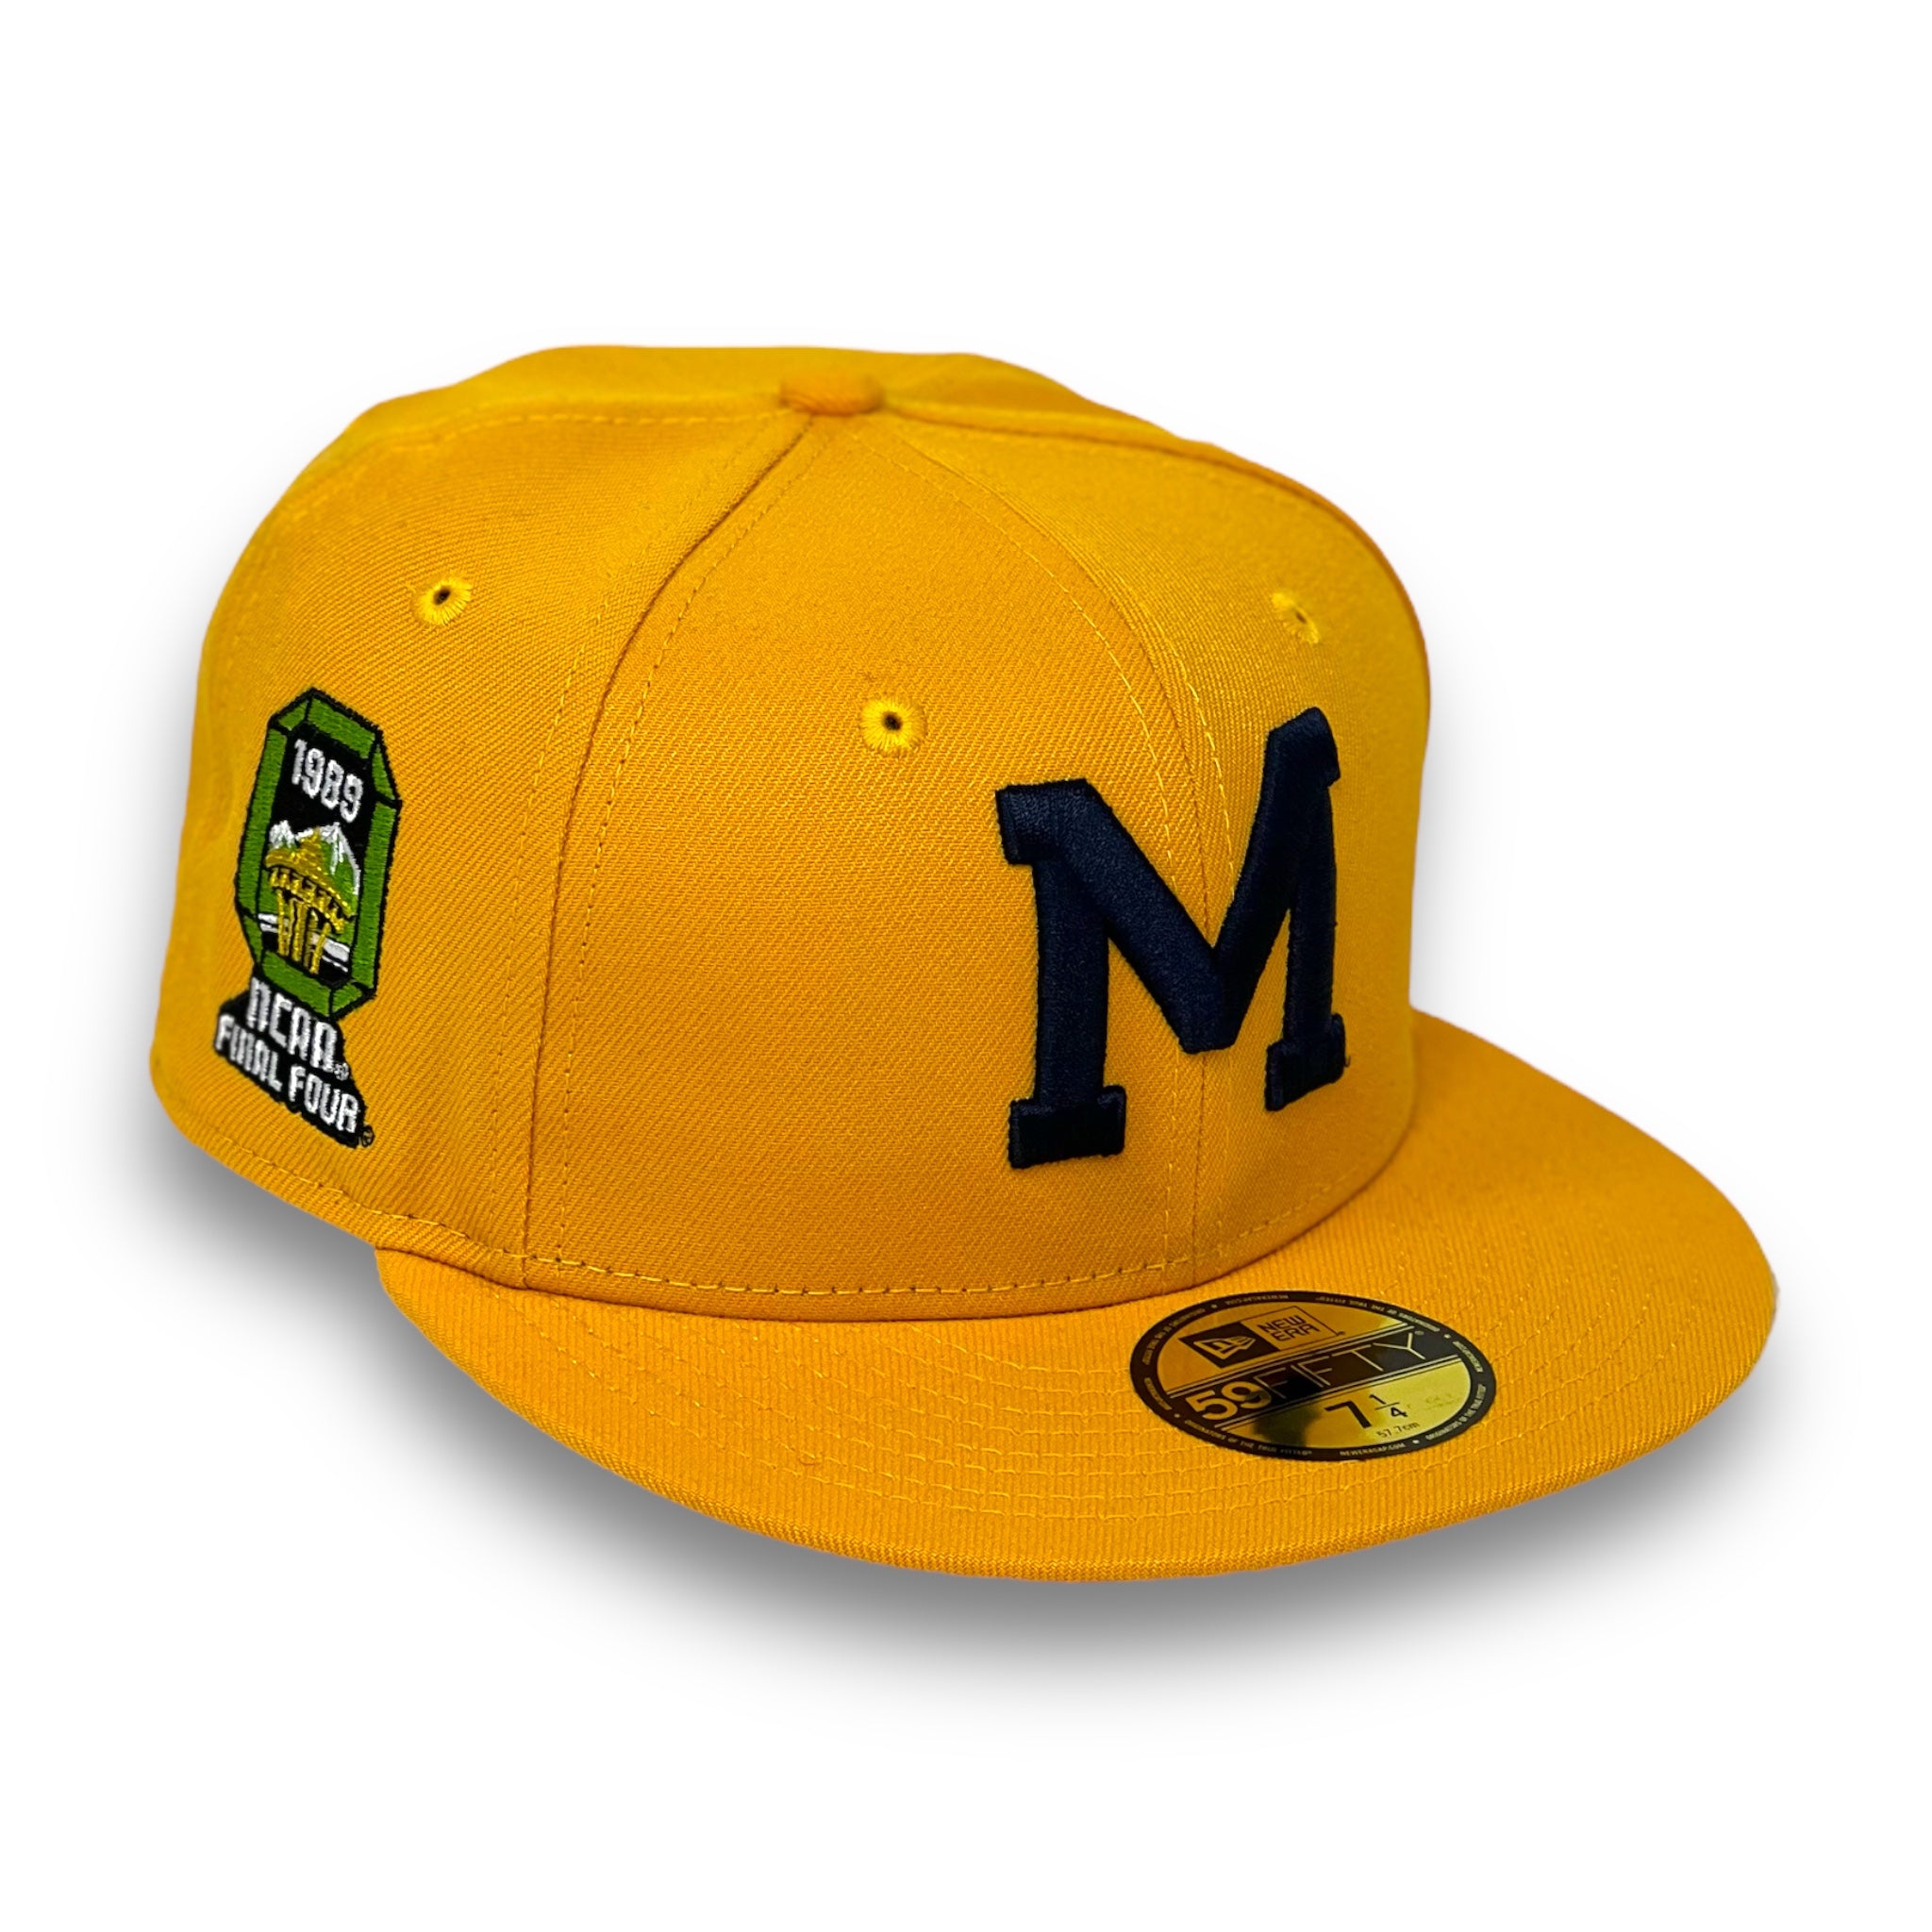 MICHIGAN WOLVERINES (1989 FINAL FOUR) NEW ERA 59FIFFTY FITTED